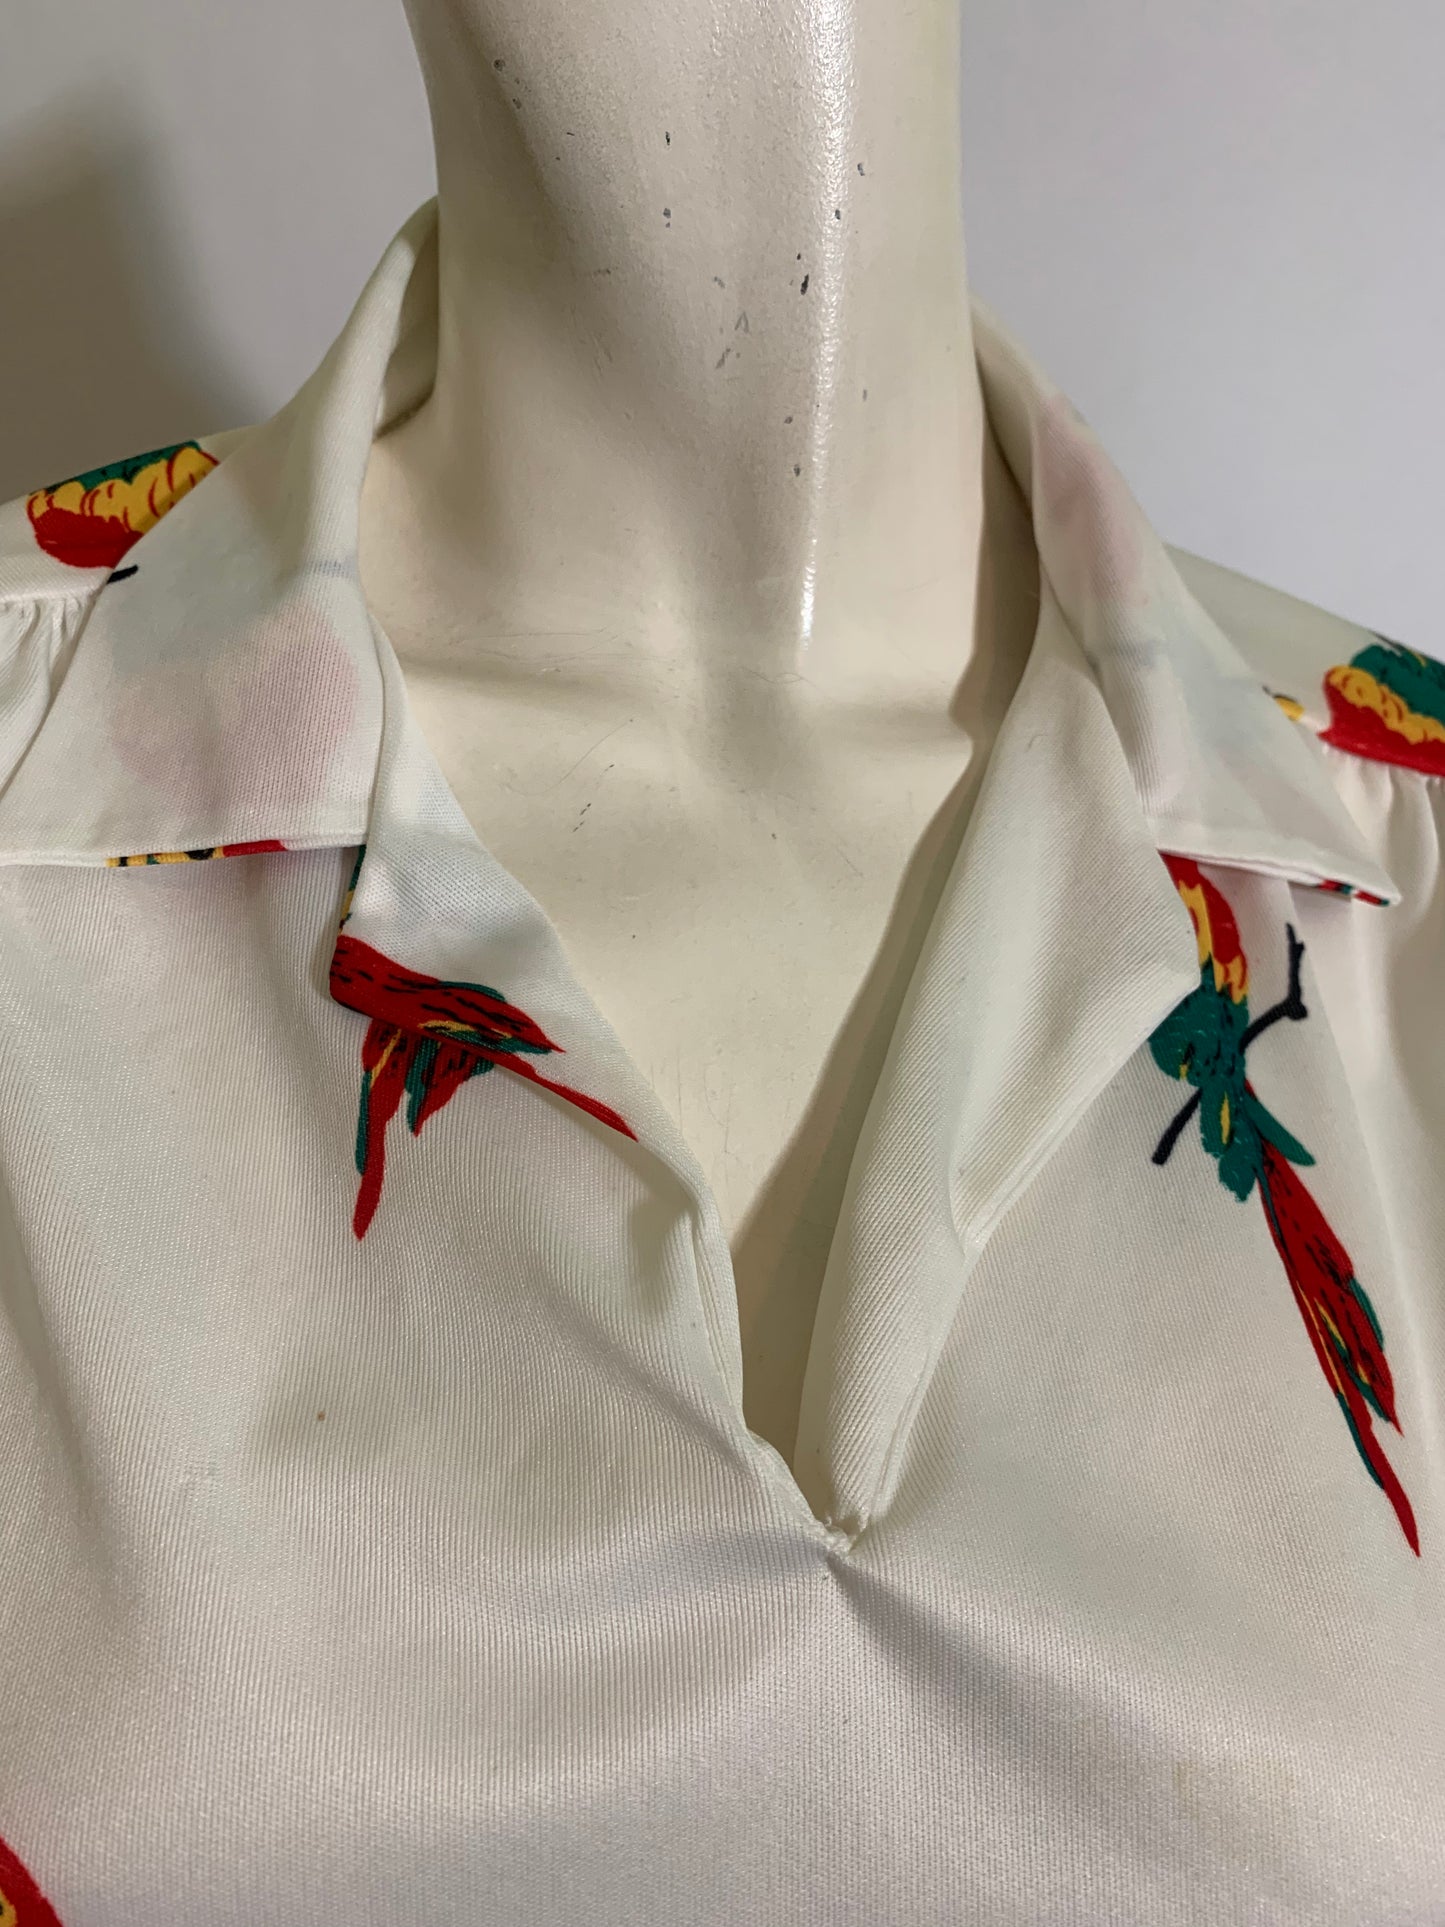 Parrot Print White Jersey Knit Pull Over Blouse circa 1980s